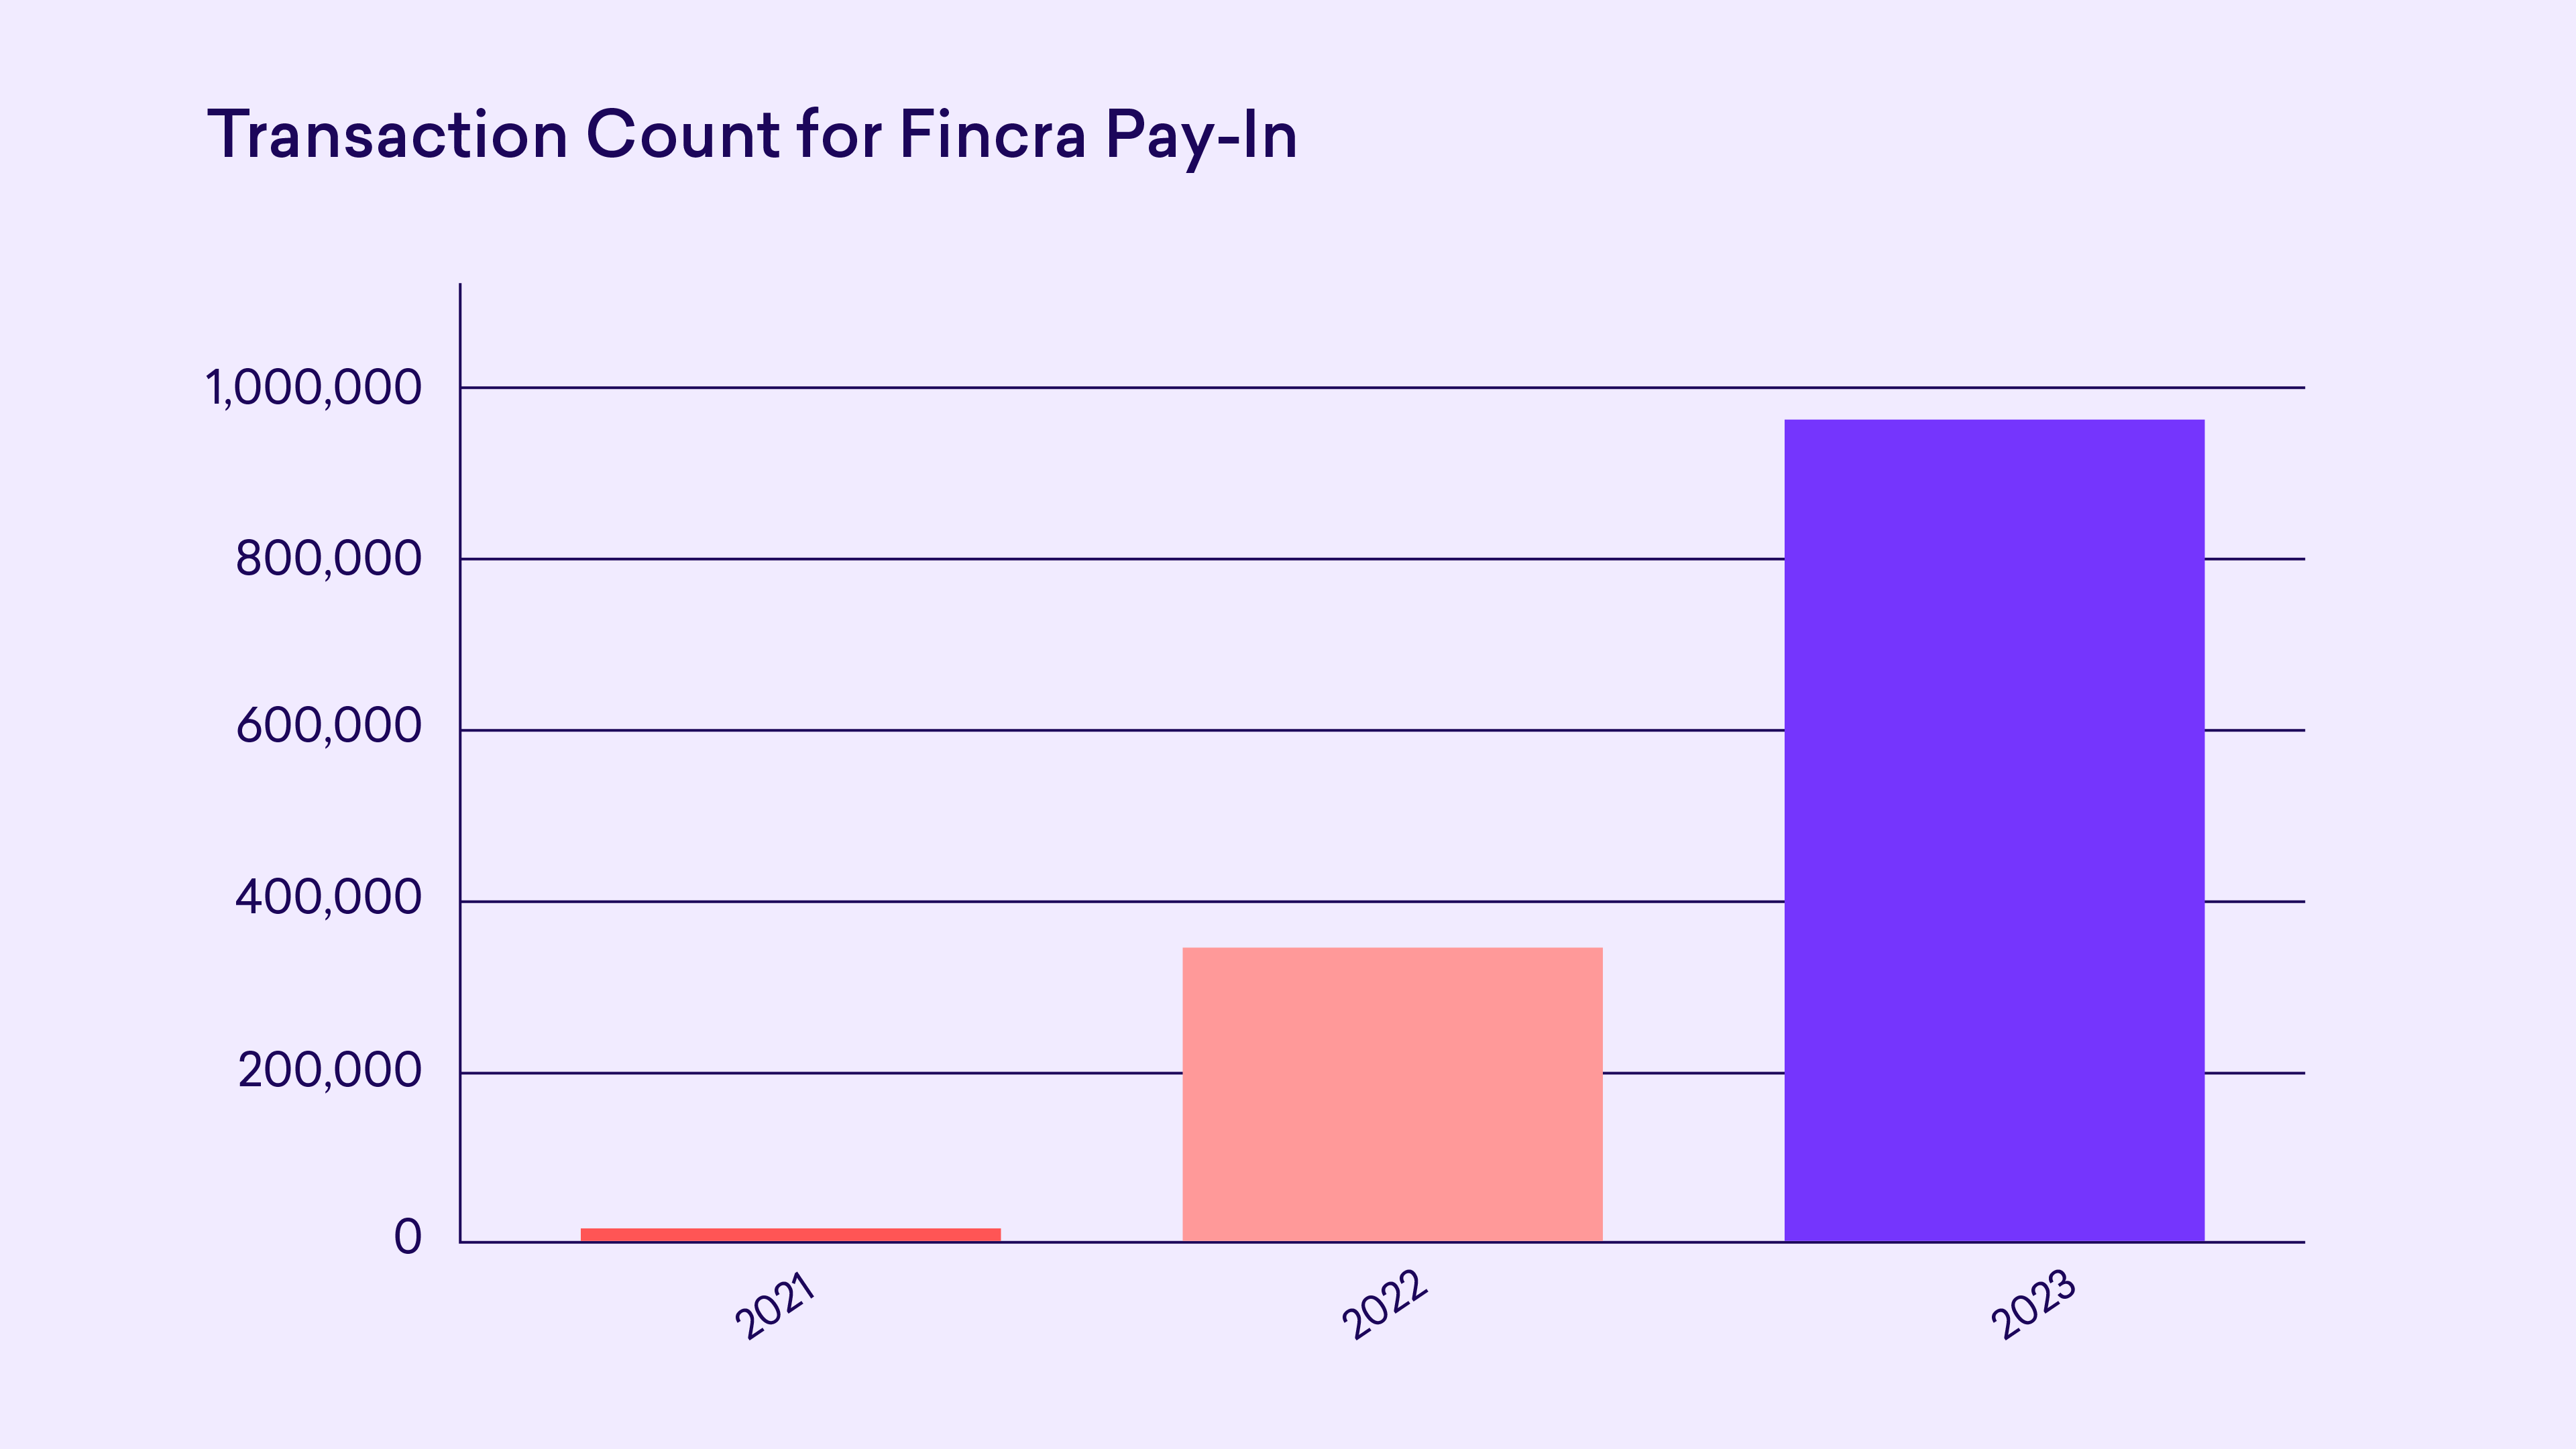 Two years of Fincra